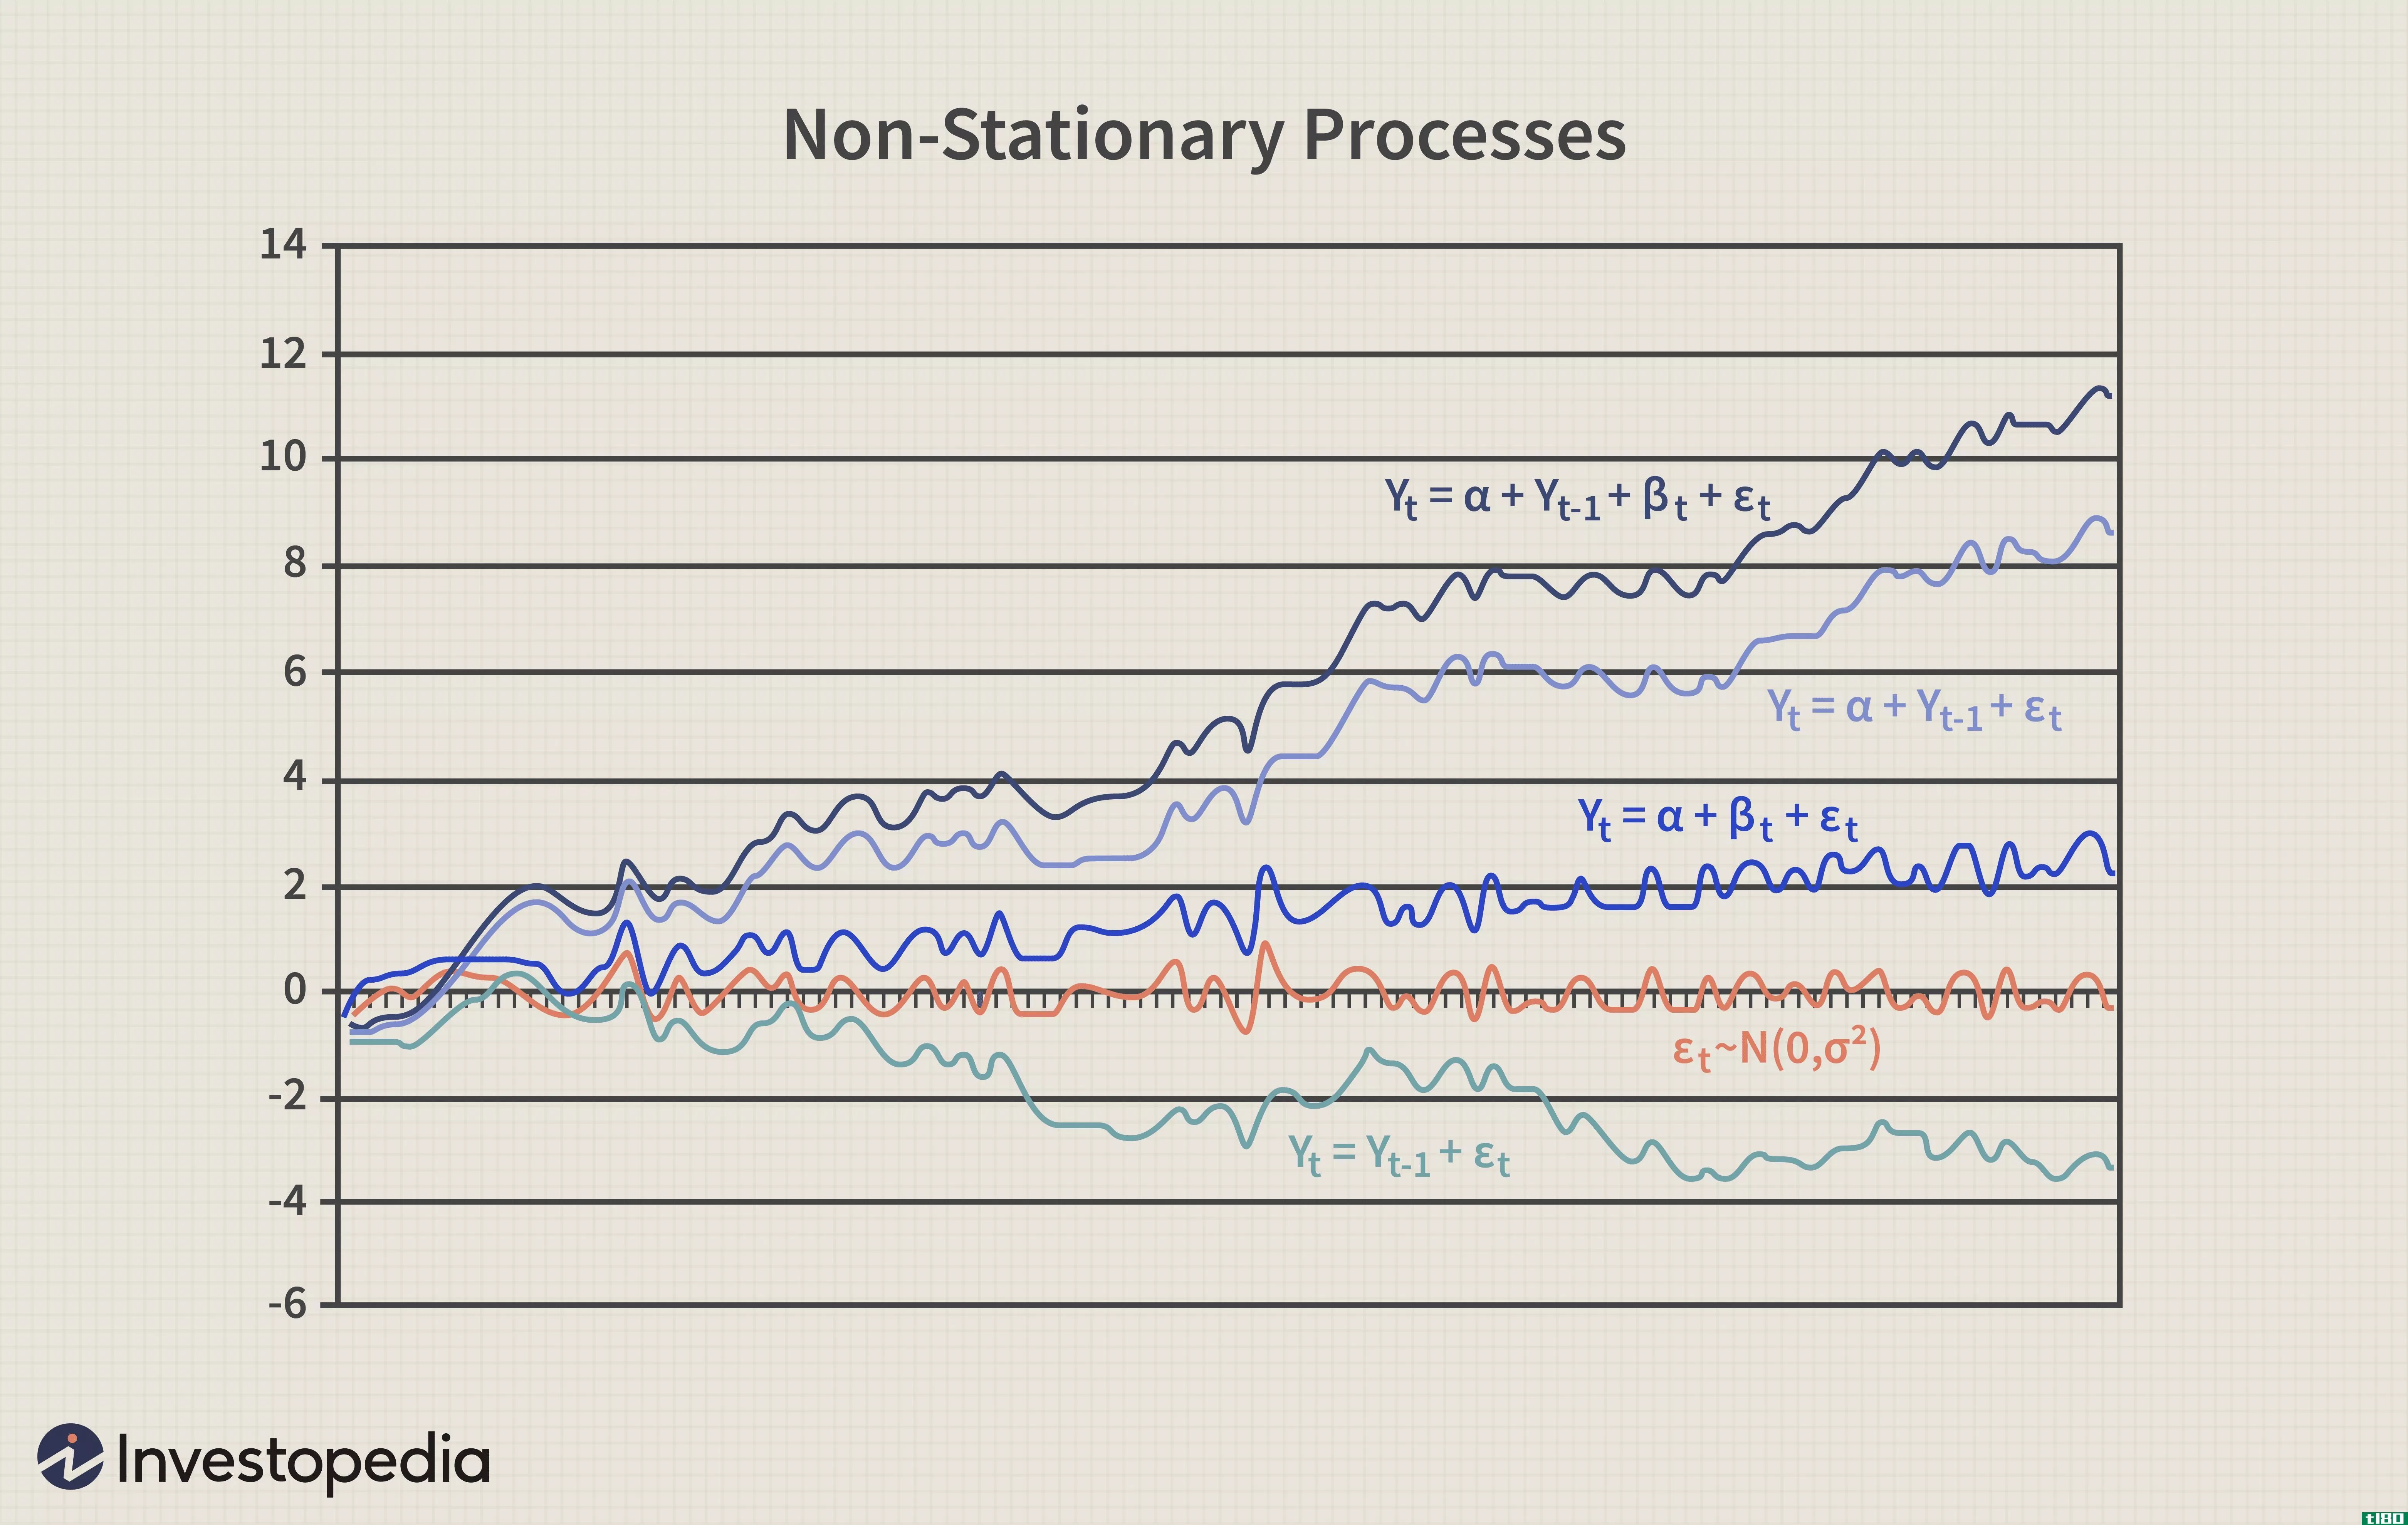 Non-stationary Processes